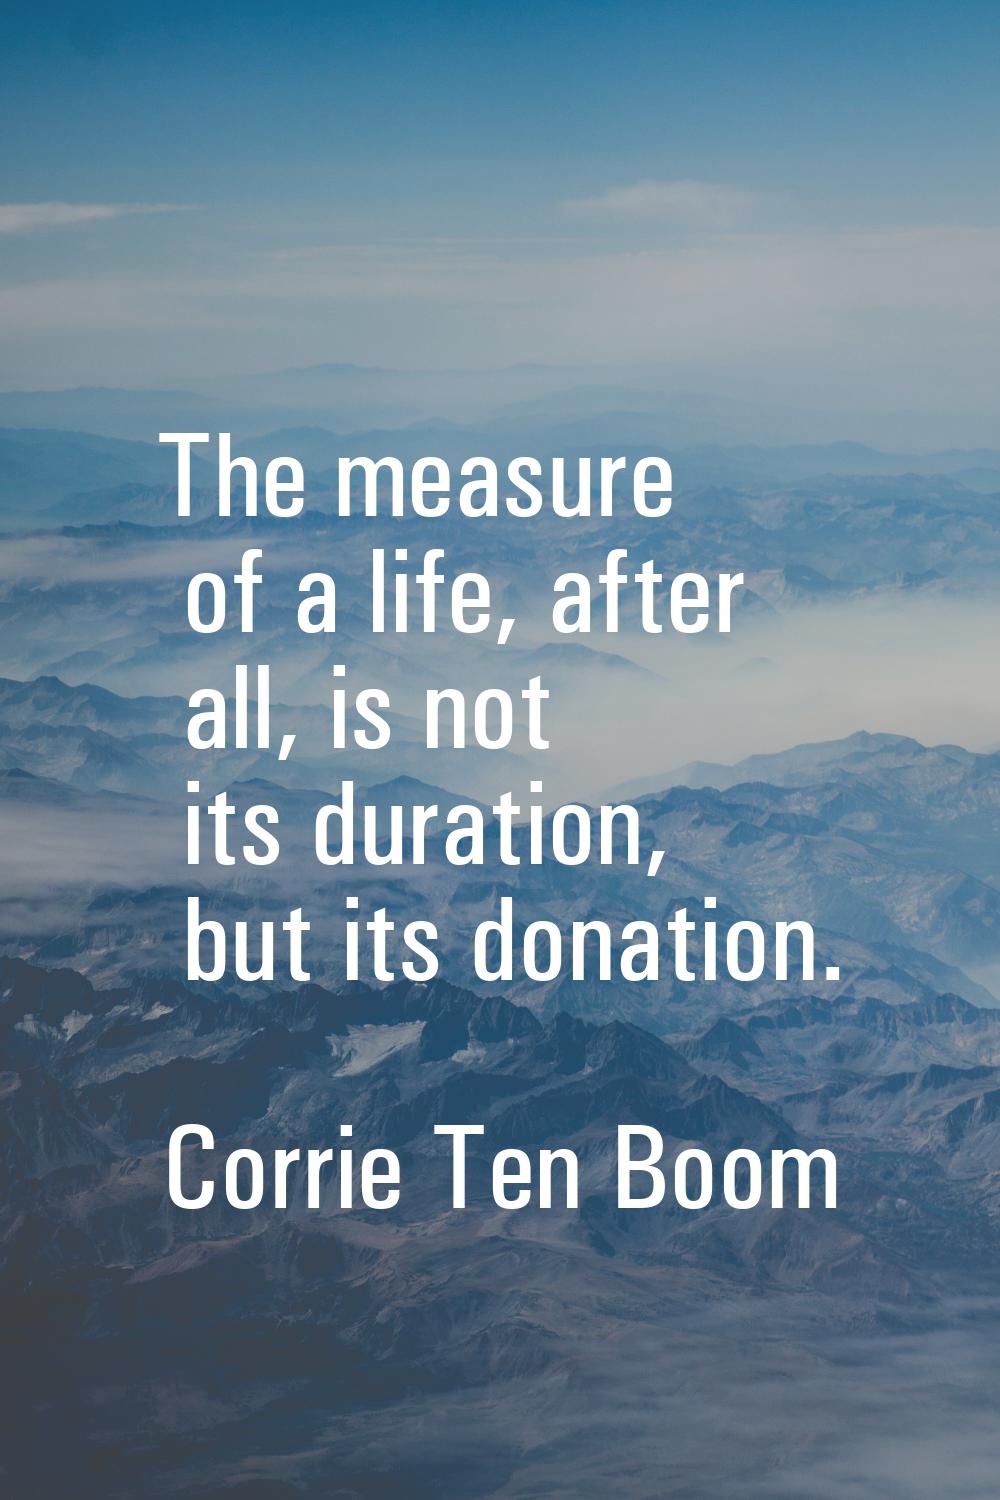 The measure of a life, after all, is not its duration, but its donation.